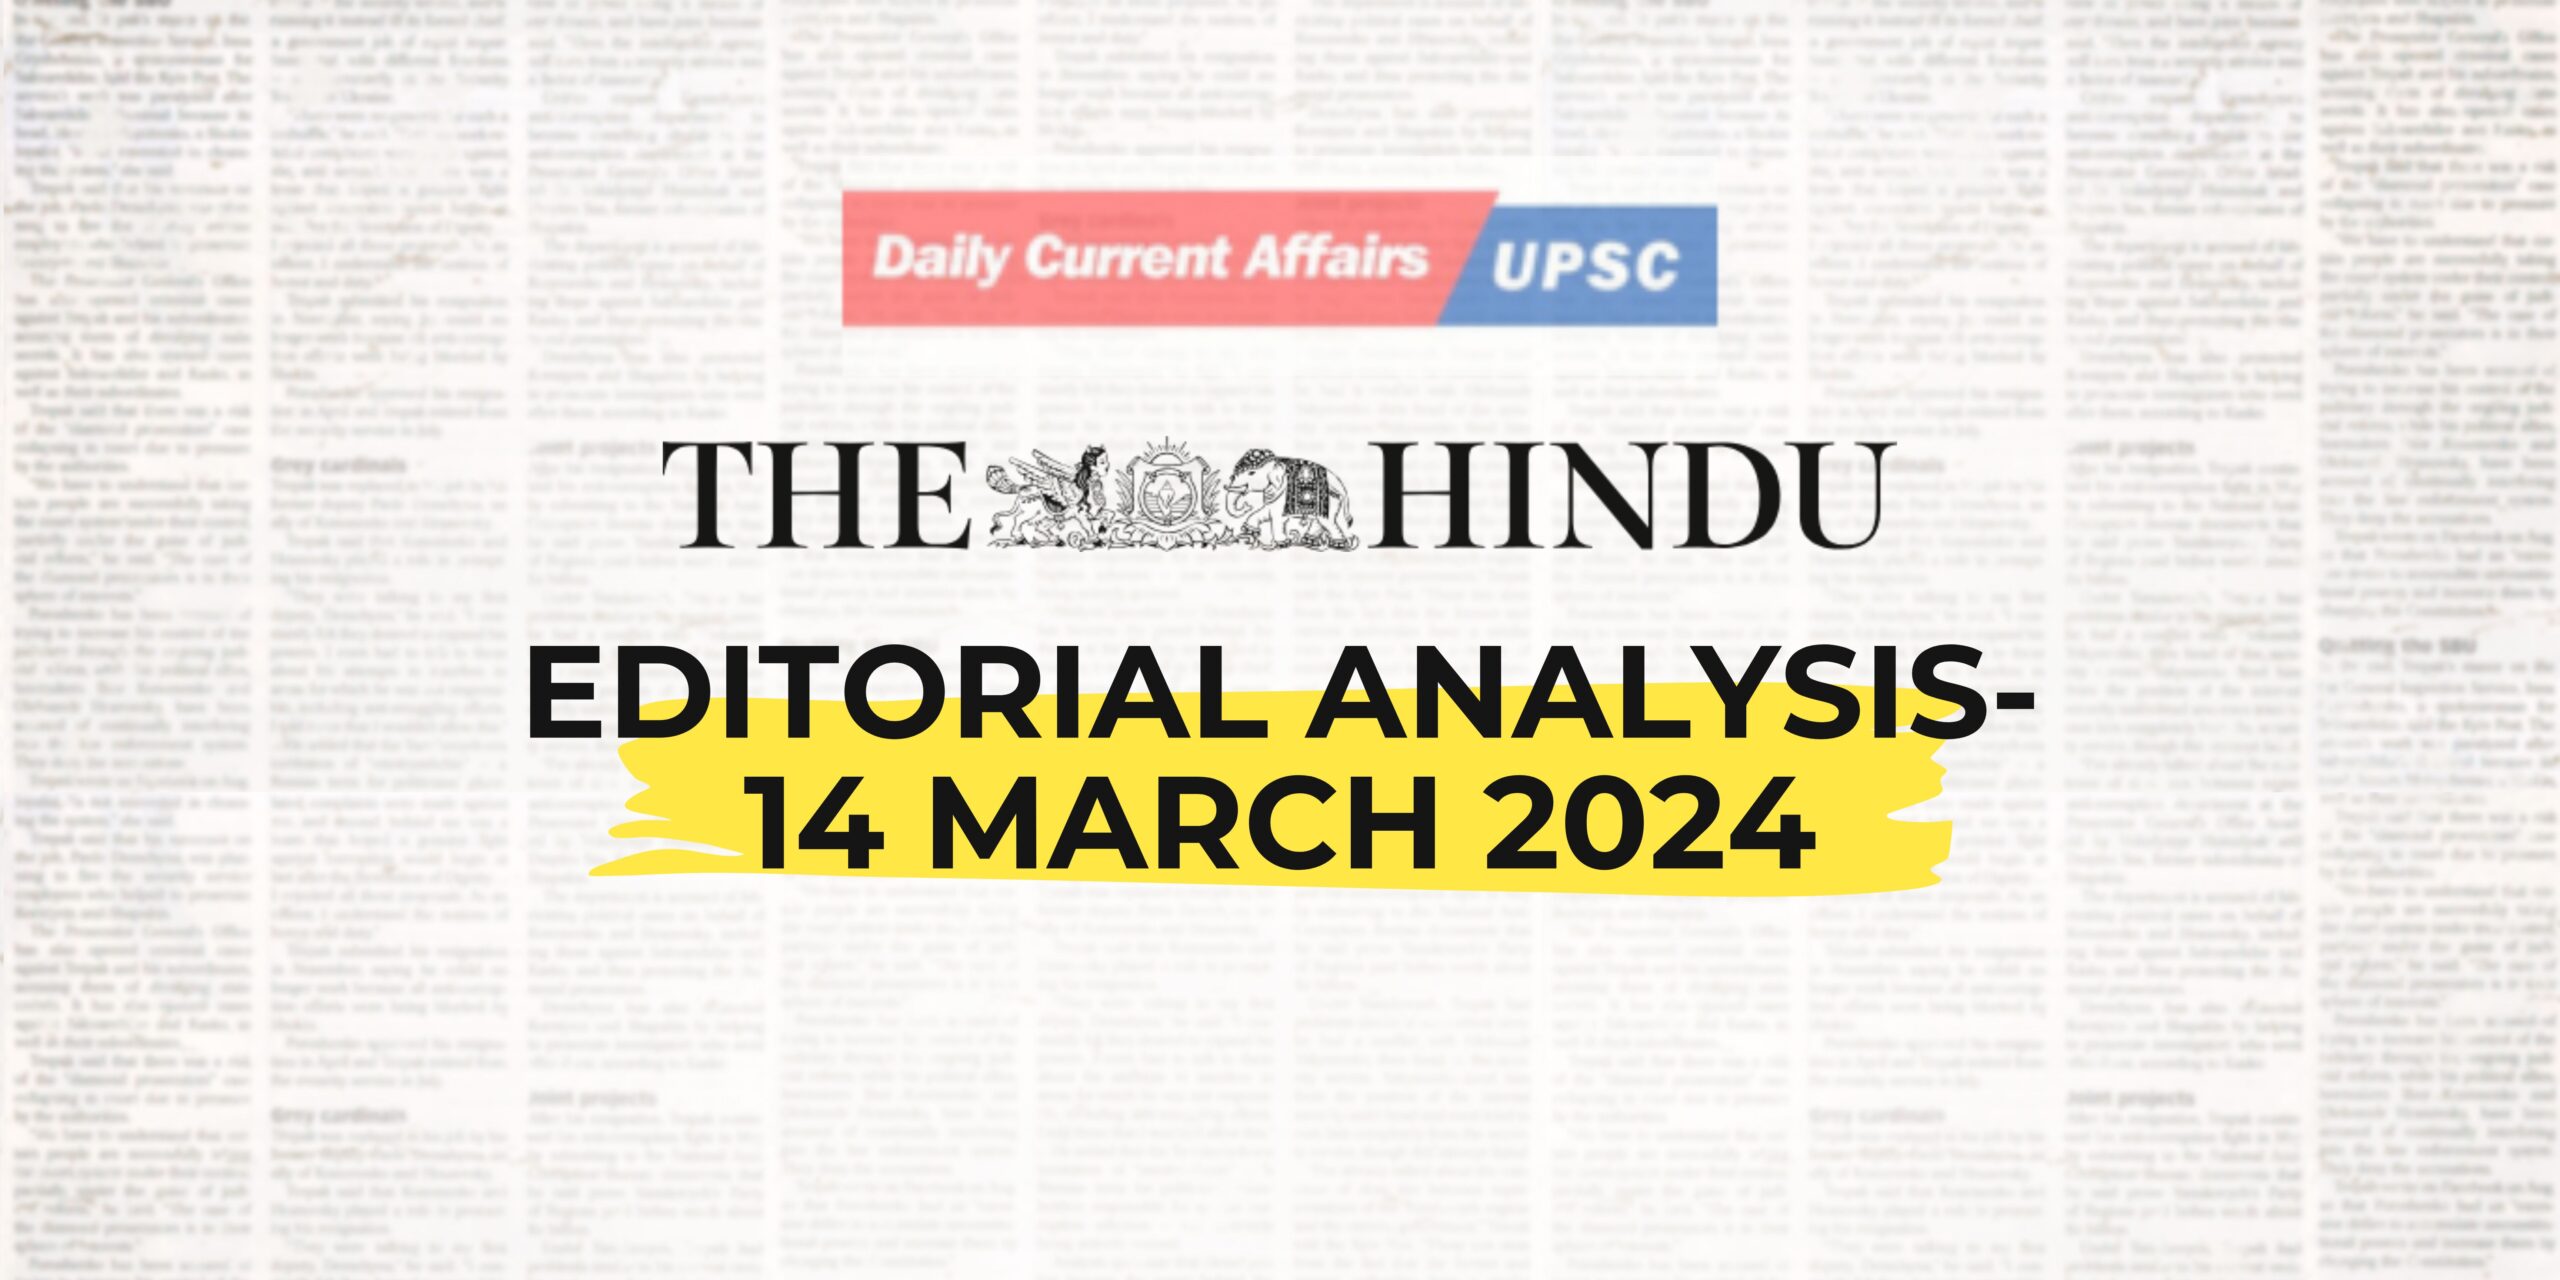 The Hindu Editorial Analysis- 14 March 2024